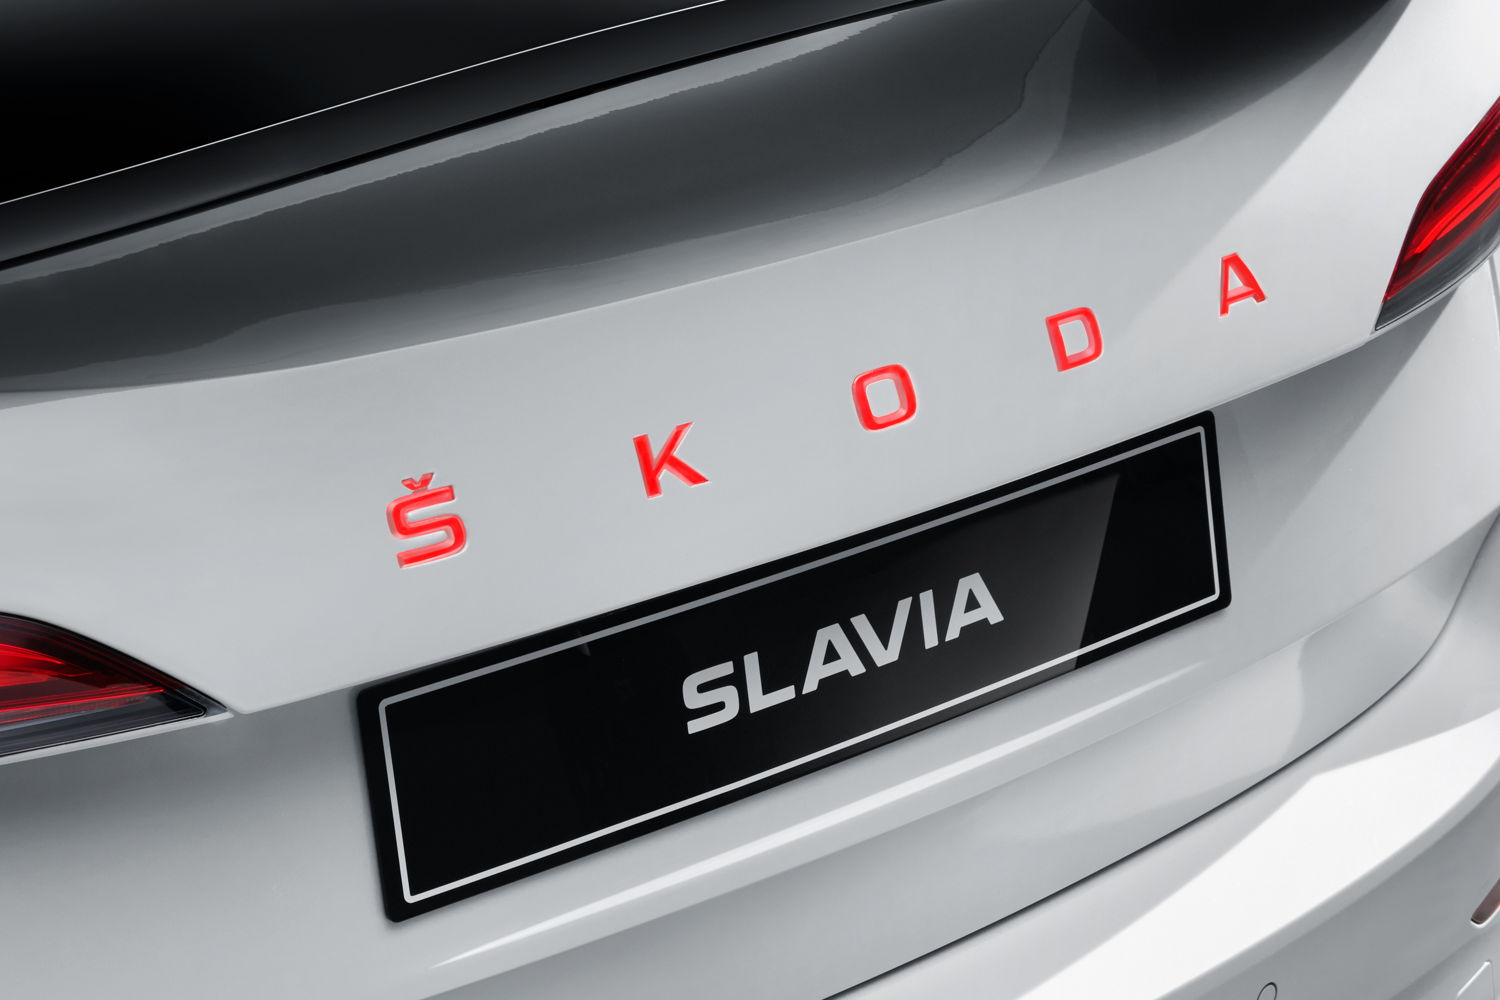 The emotive spider version of the ŠKODA SCALA recalls the beginnings of the ŠKODA brand. To mark the 125th anniversary of the company's founding, the students of the ŠKODA Academy are commemorating the birth of the Czech manufacturer with their traditional student car project.